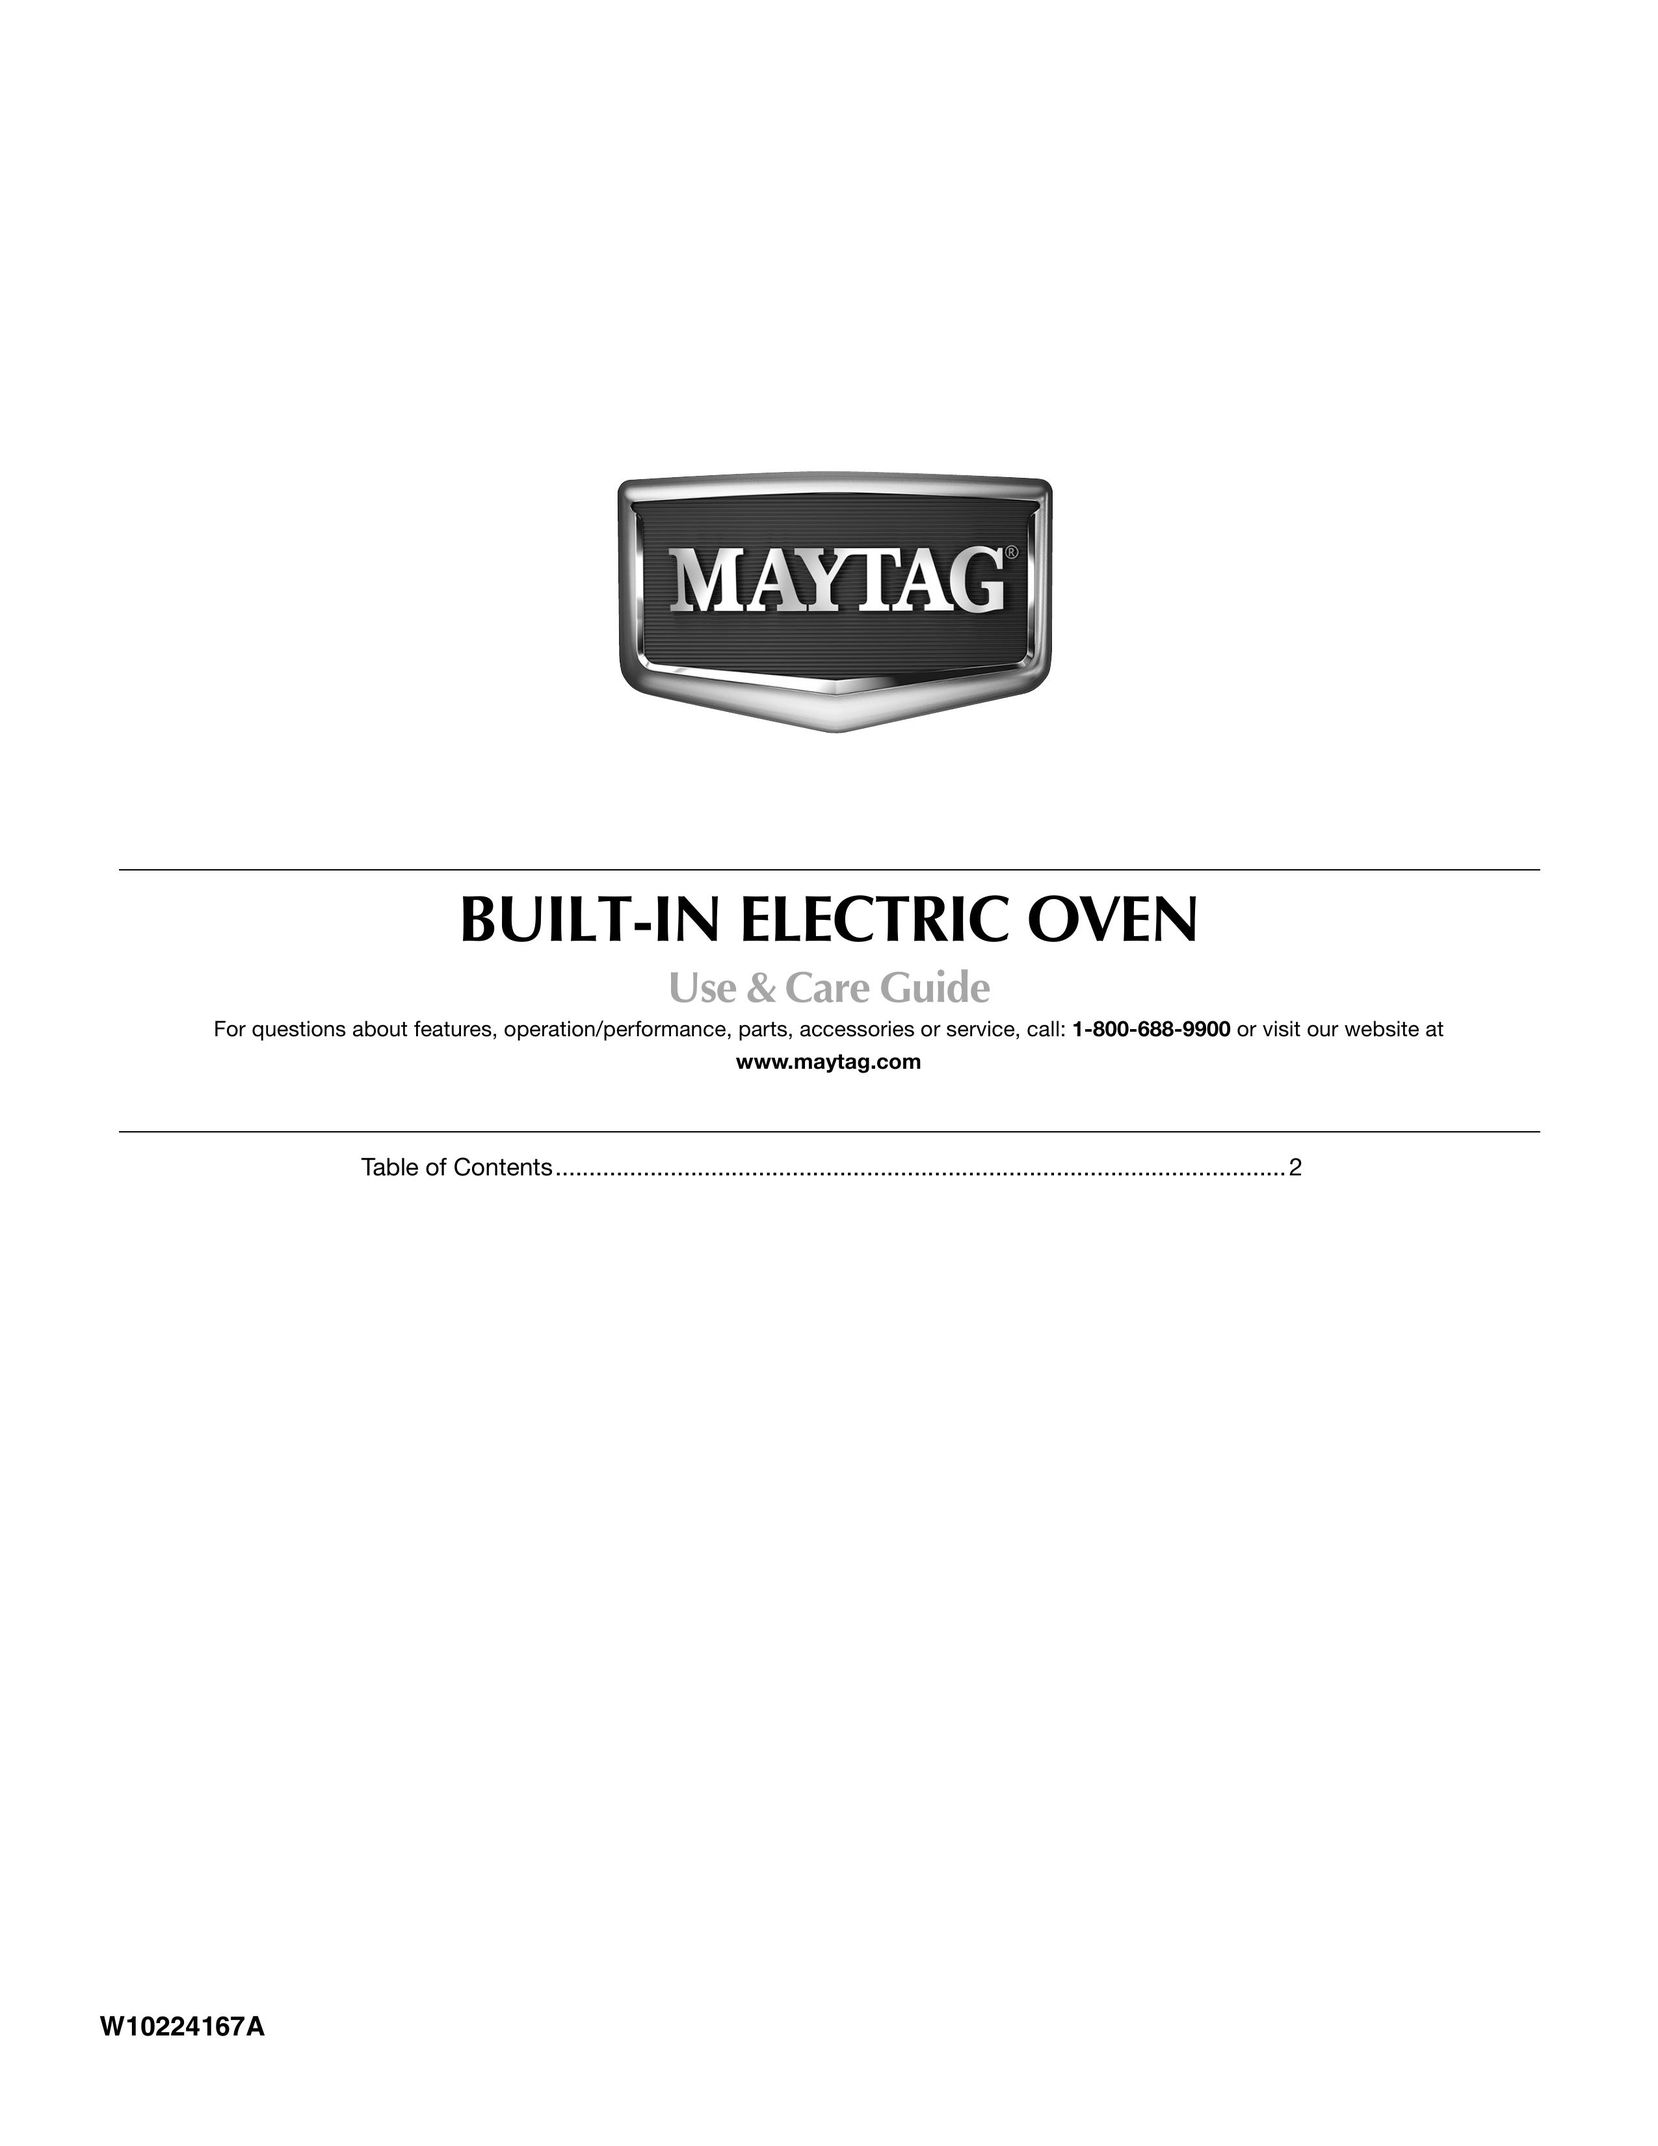 Maytag W10224167A Oven User Manual